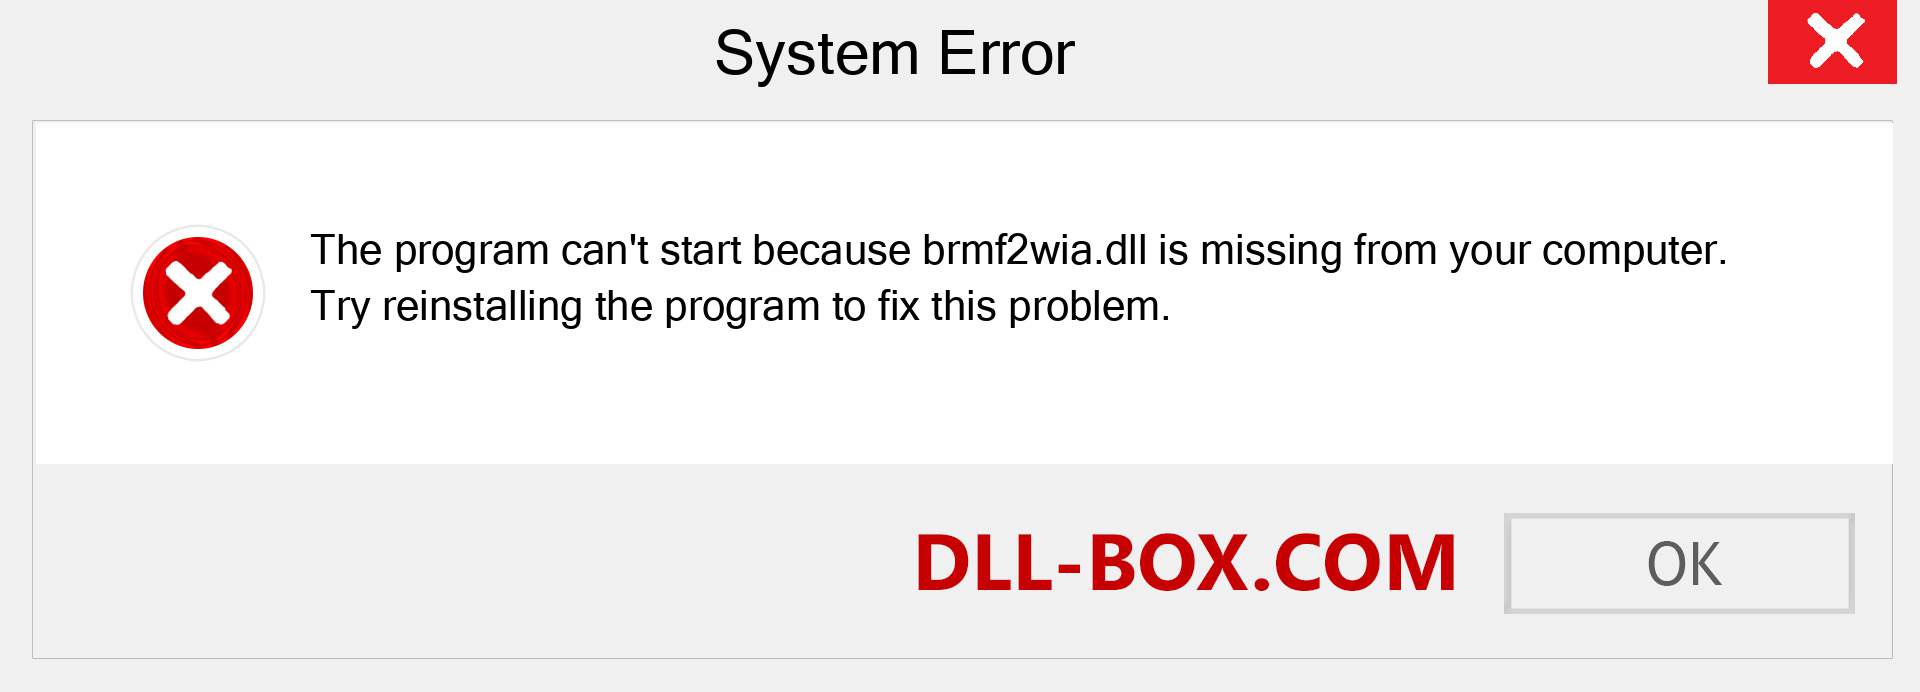  brmf2wia.dll file is missing?. Download for Windows 7, 8, 10 - Fix  brmf2wia dll Missing Error on Windows, photos, images